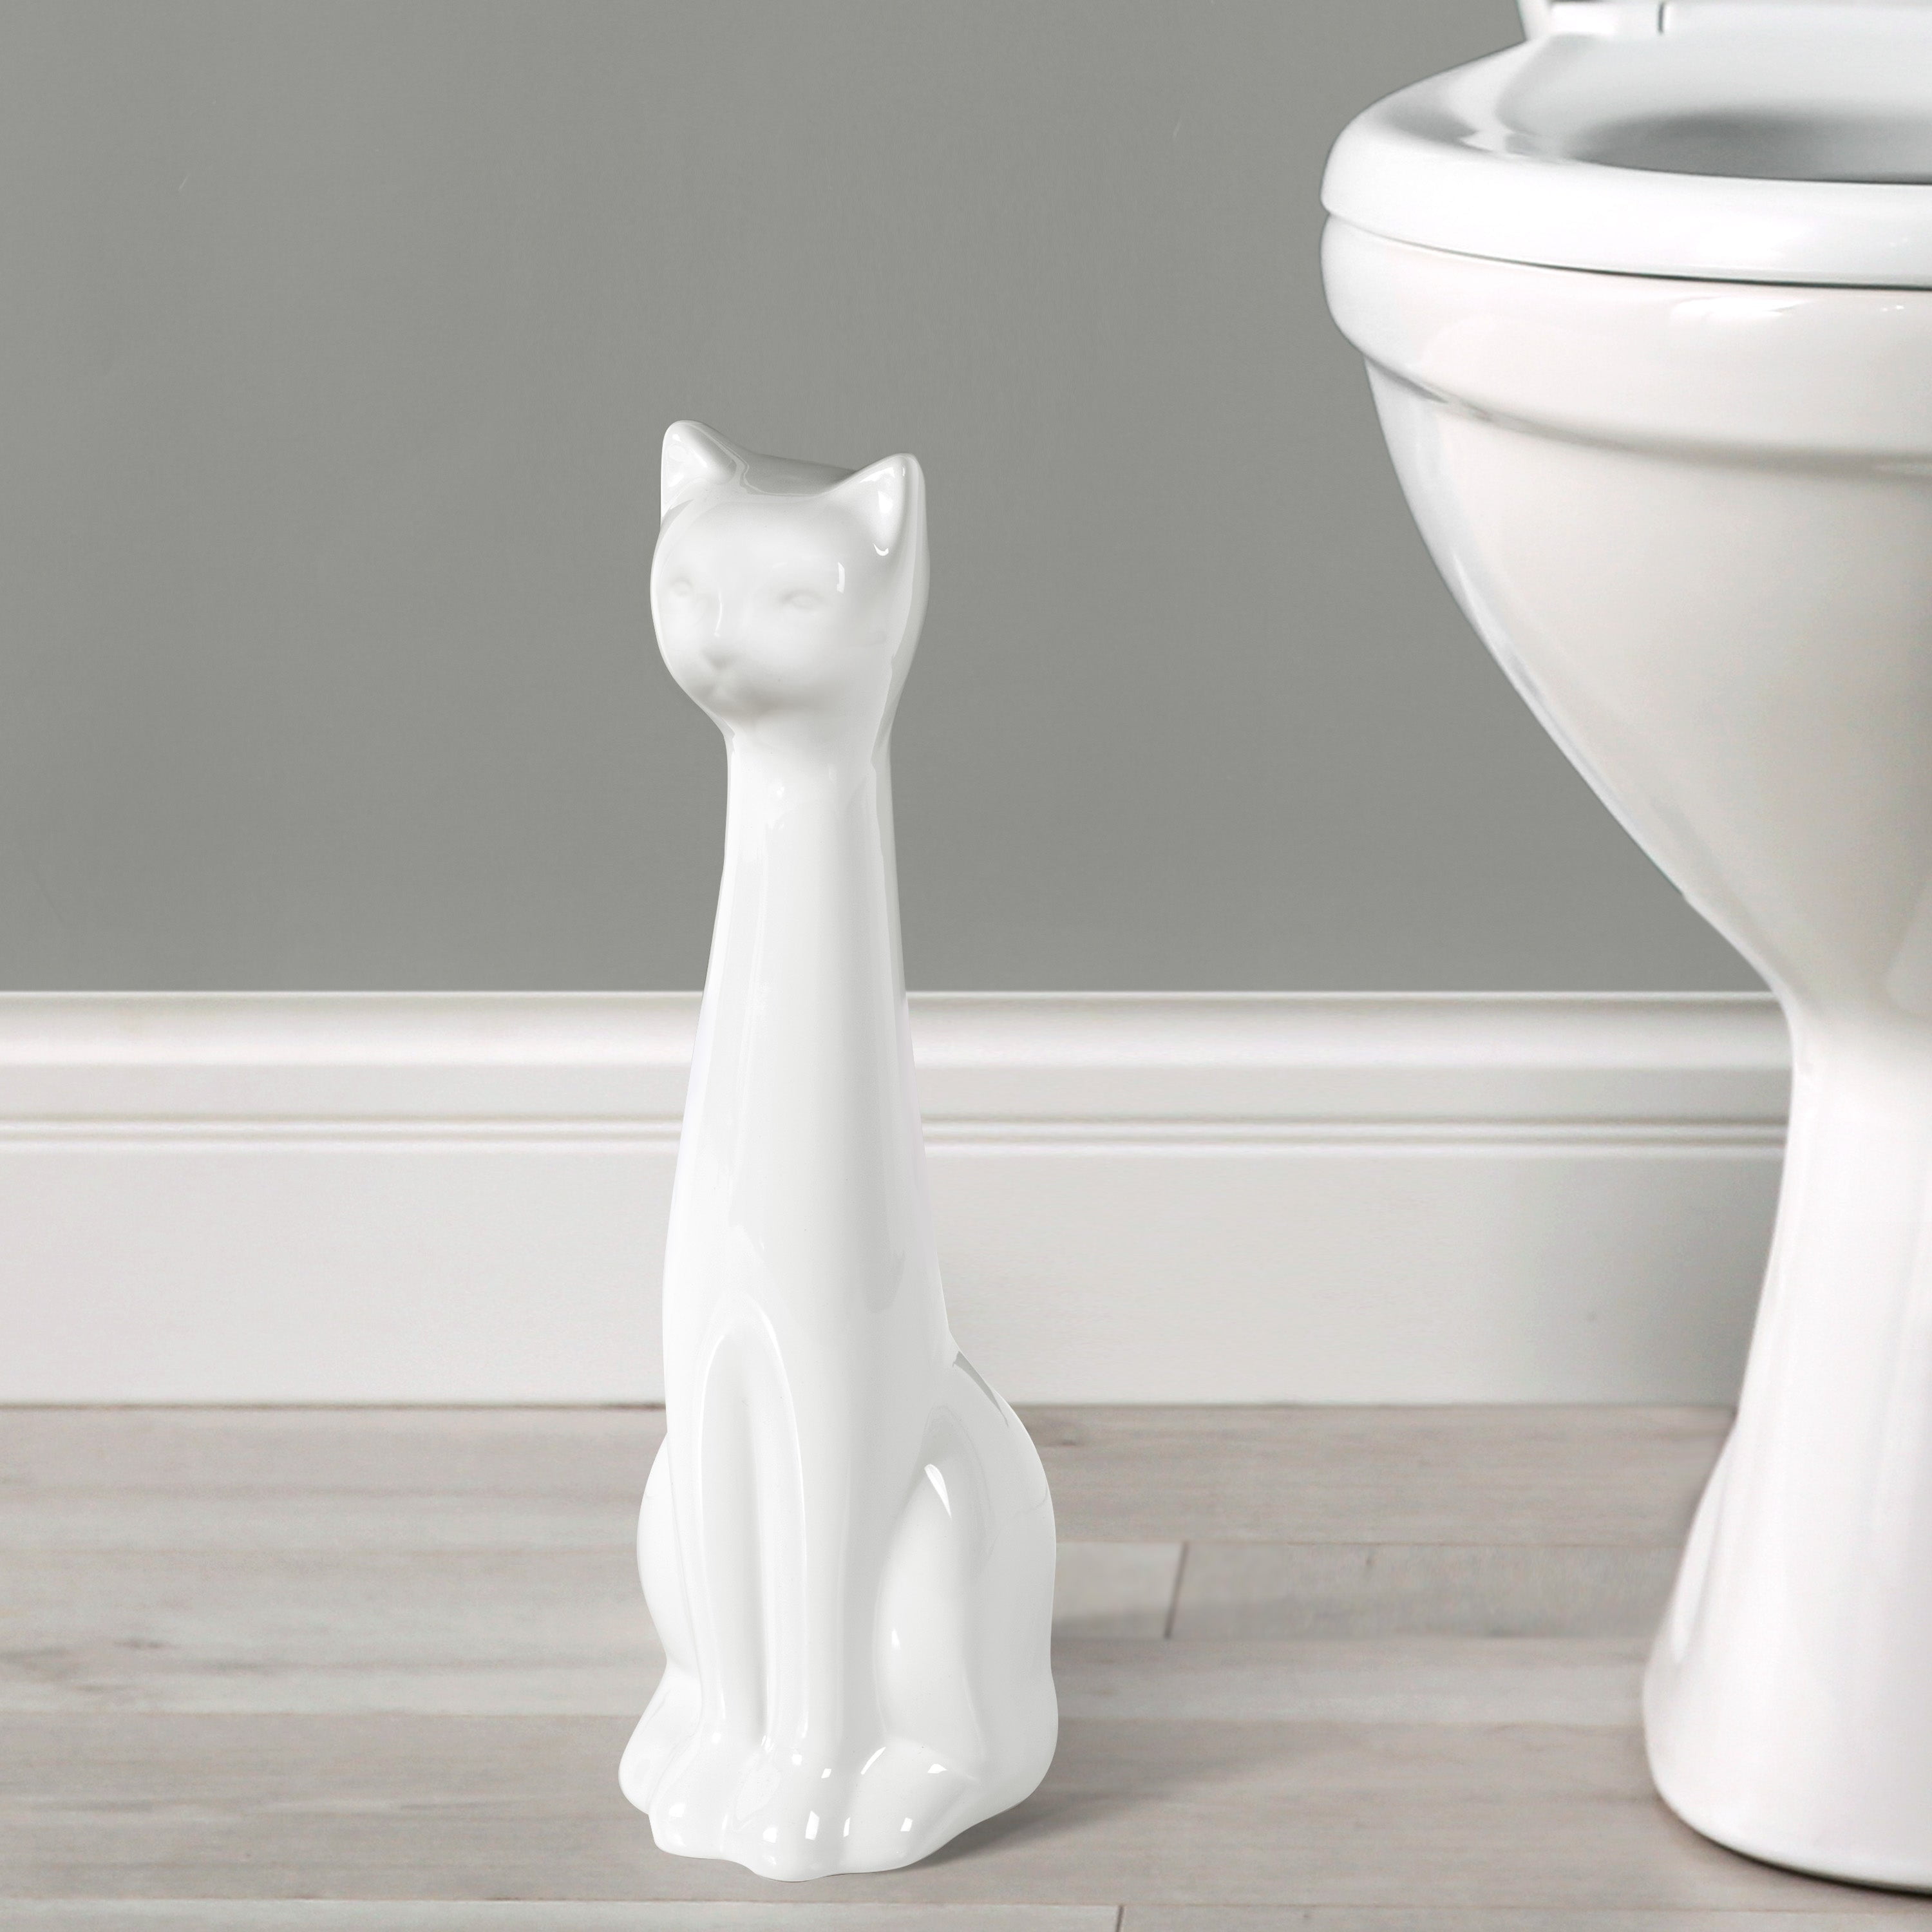 Allure Home Creations Ceramic Cat Bowl Toilet Brush Holder and Lotion Pump - White - Brush Included - 3PC Set